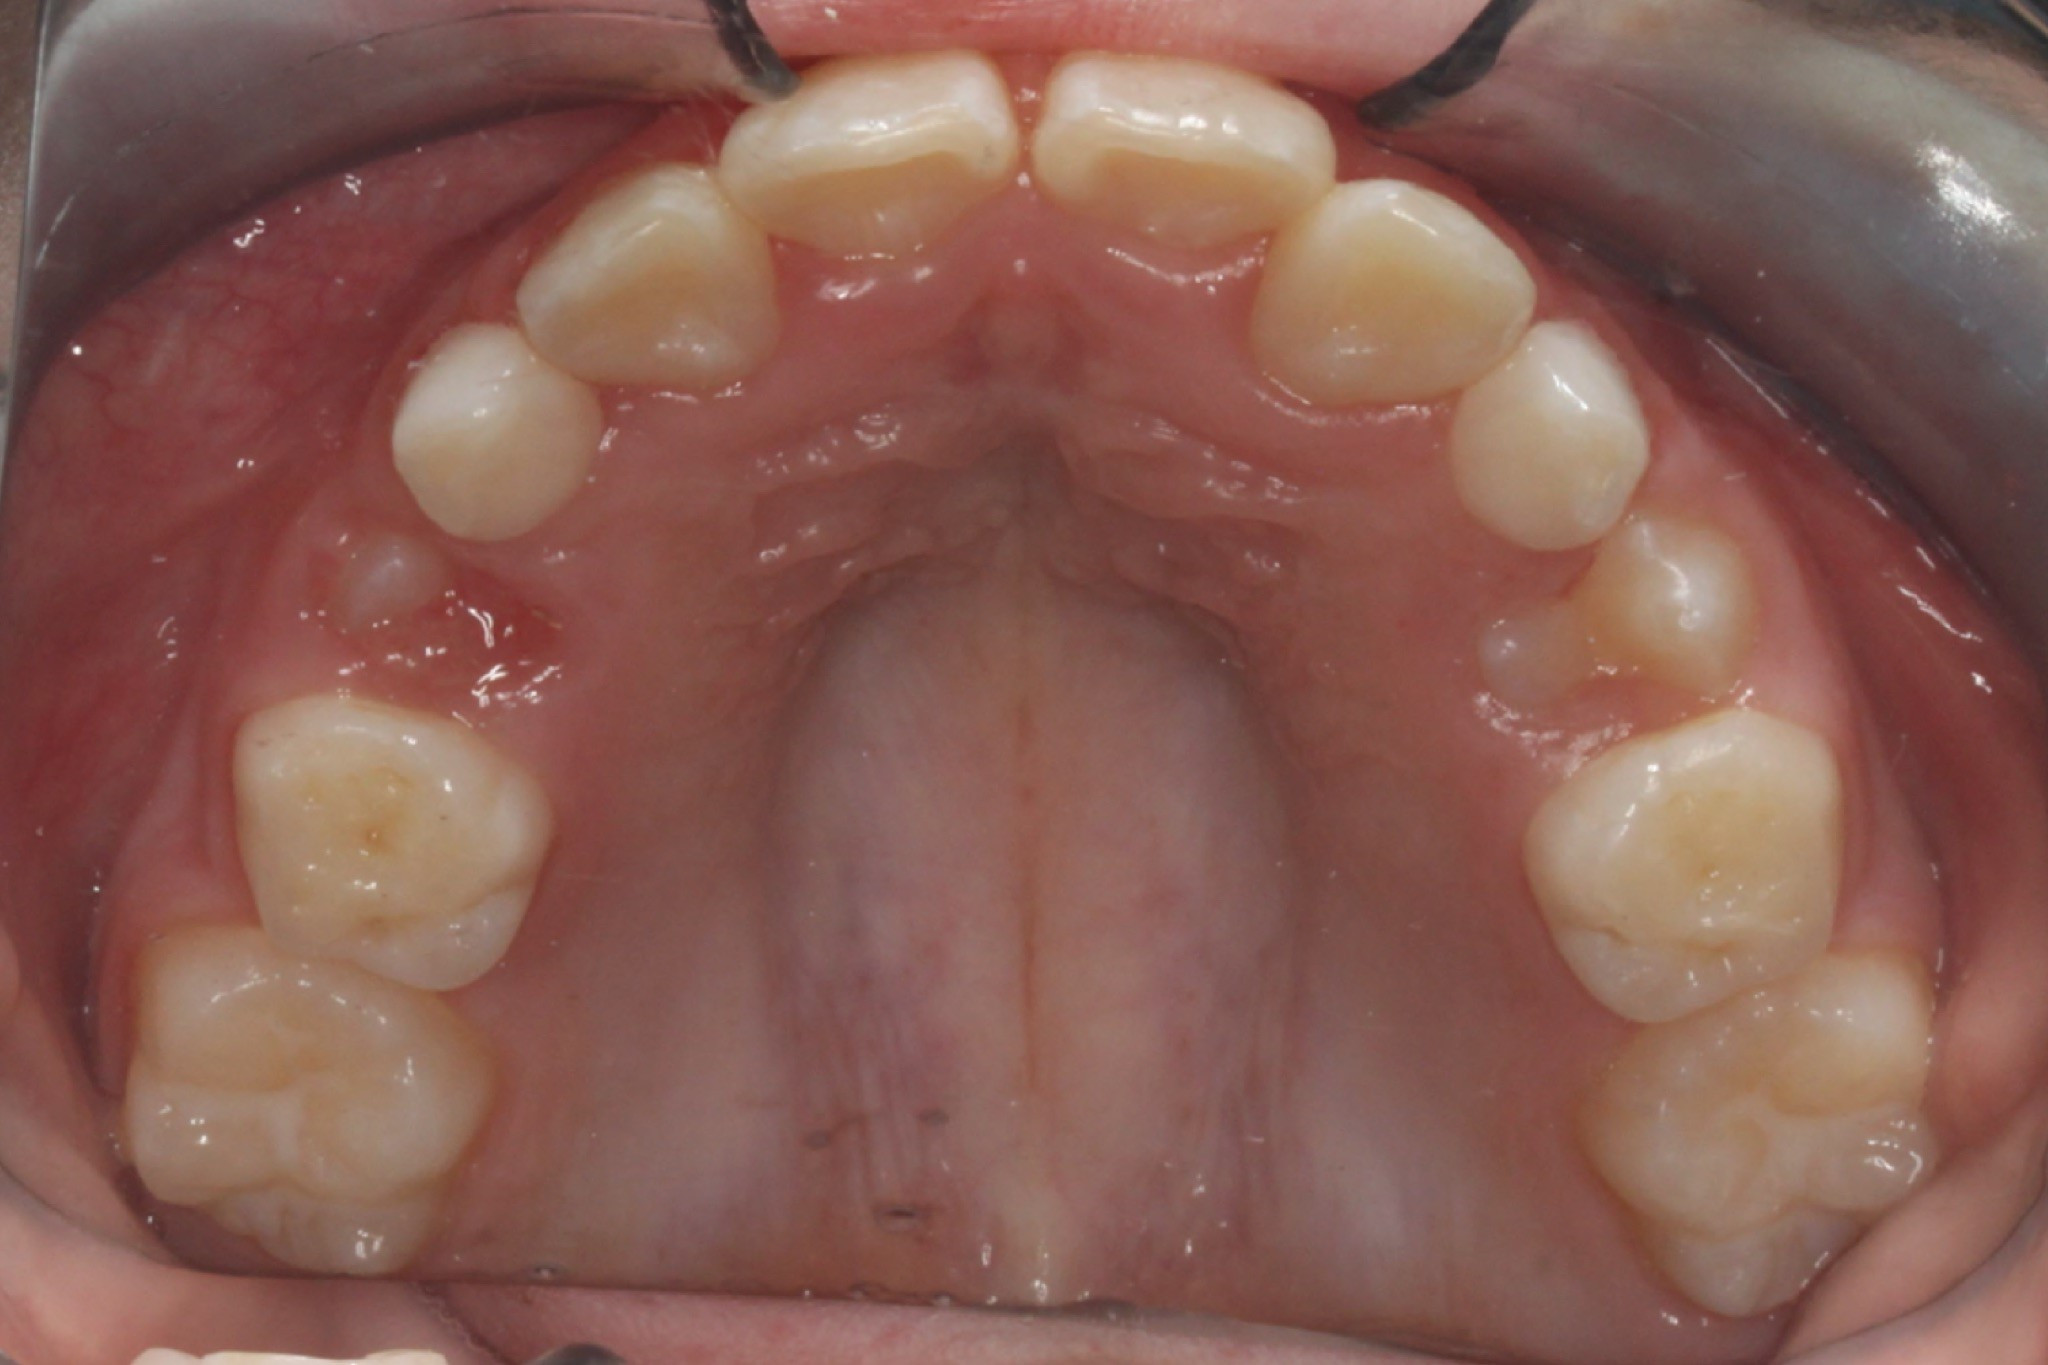 After photo: Straightened upper teeth